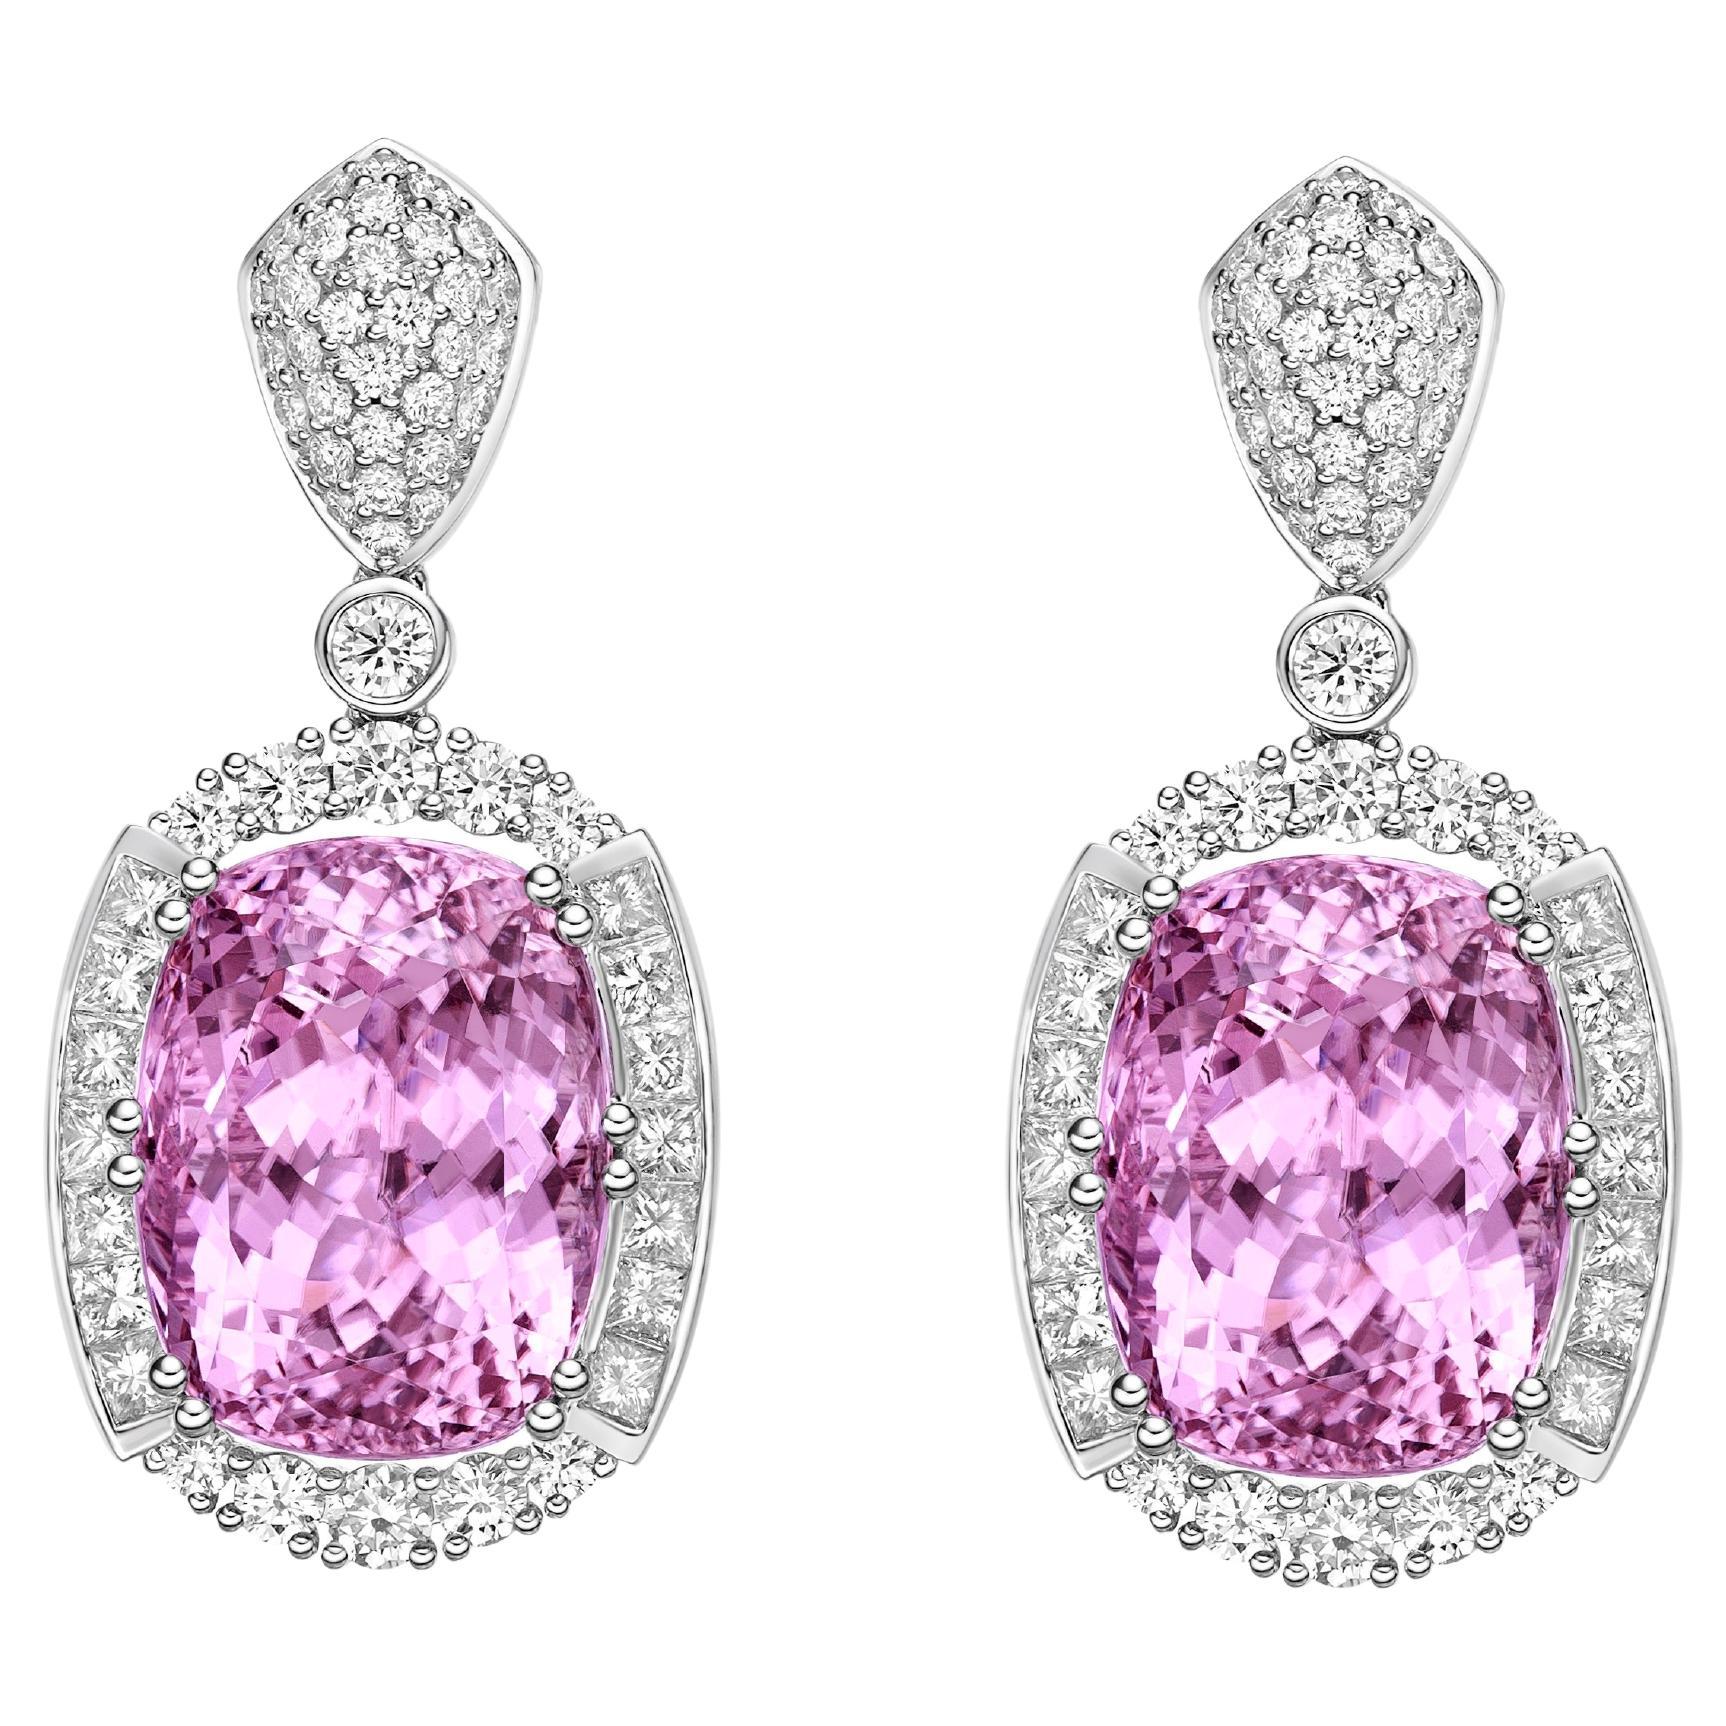 35.67 Carat Pink Tourmaline Drop Earrings in 18Karat White Gold with Diamond. For Sale